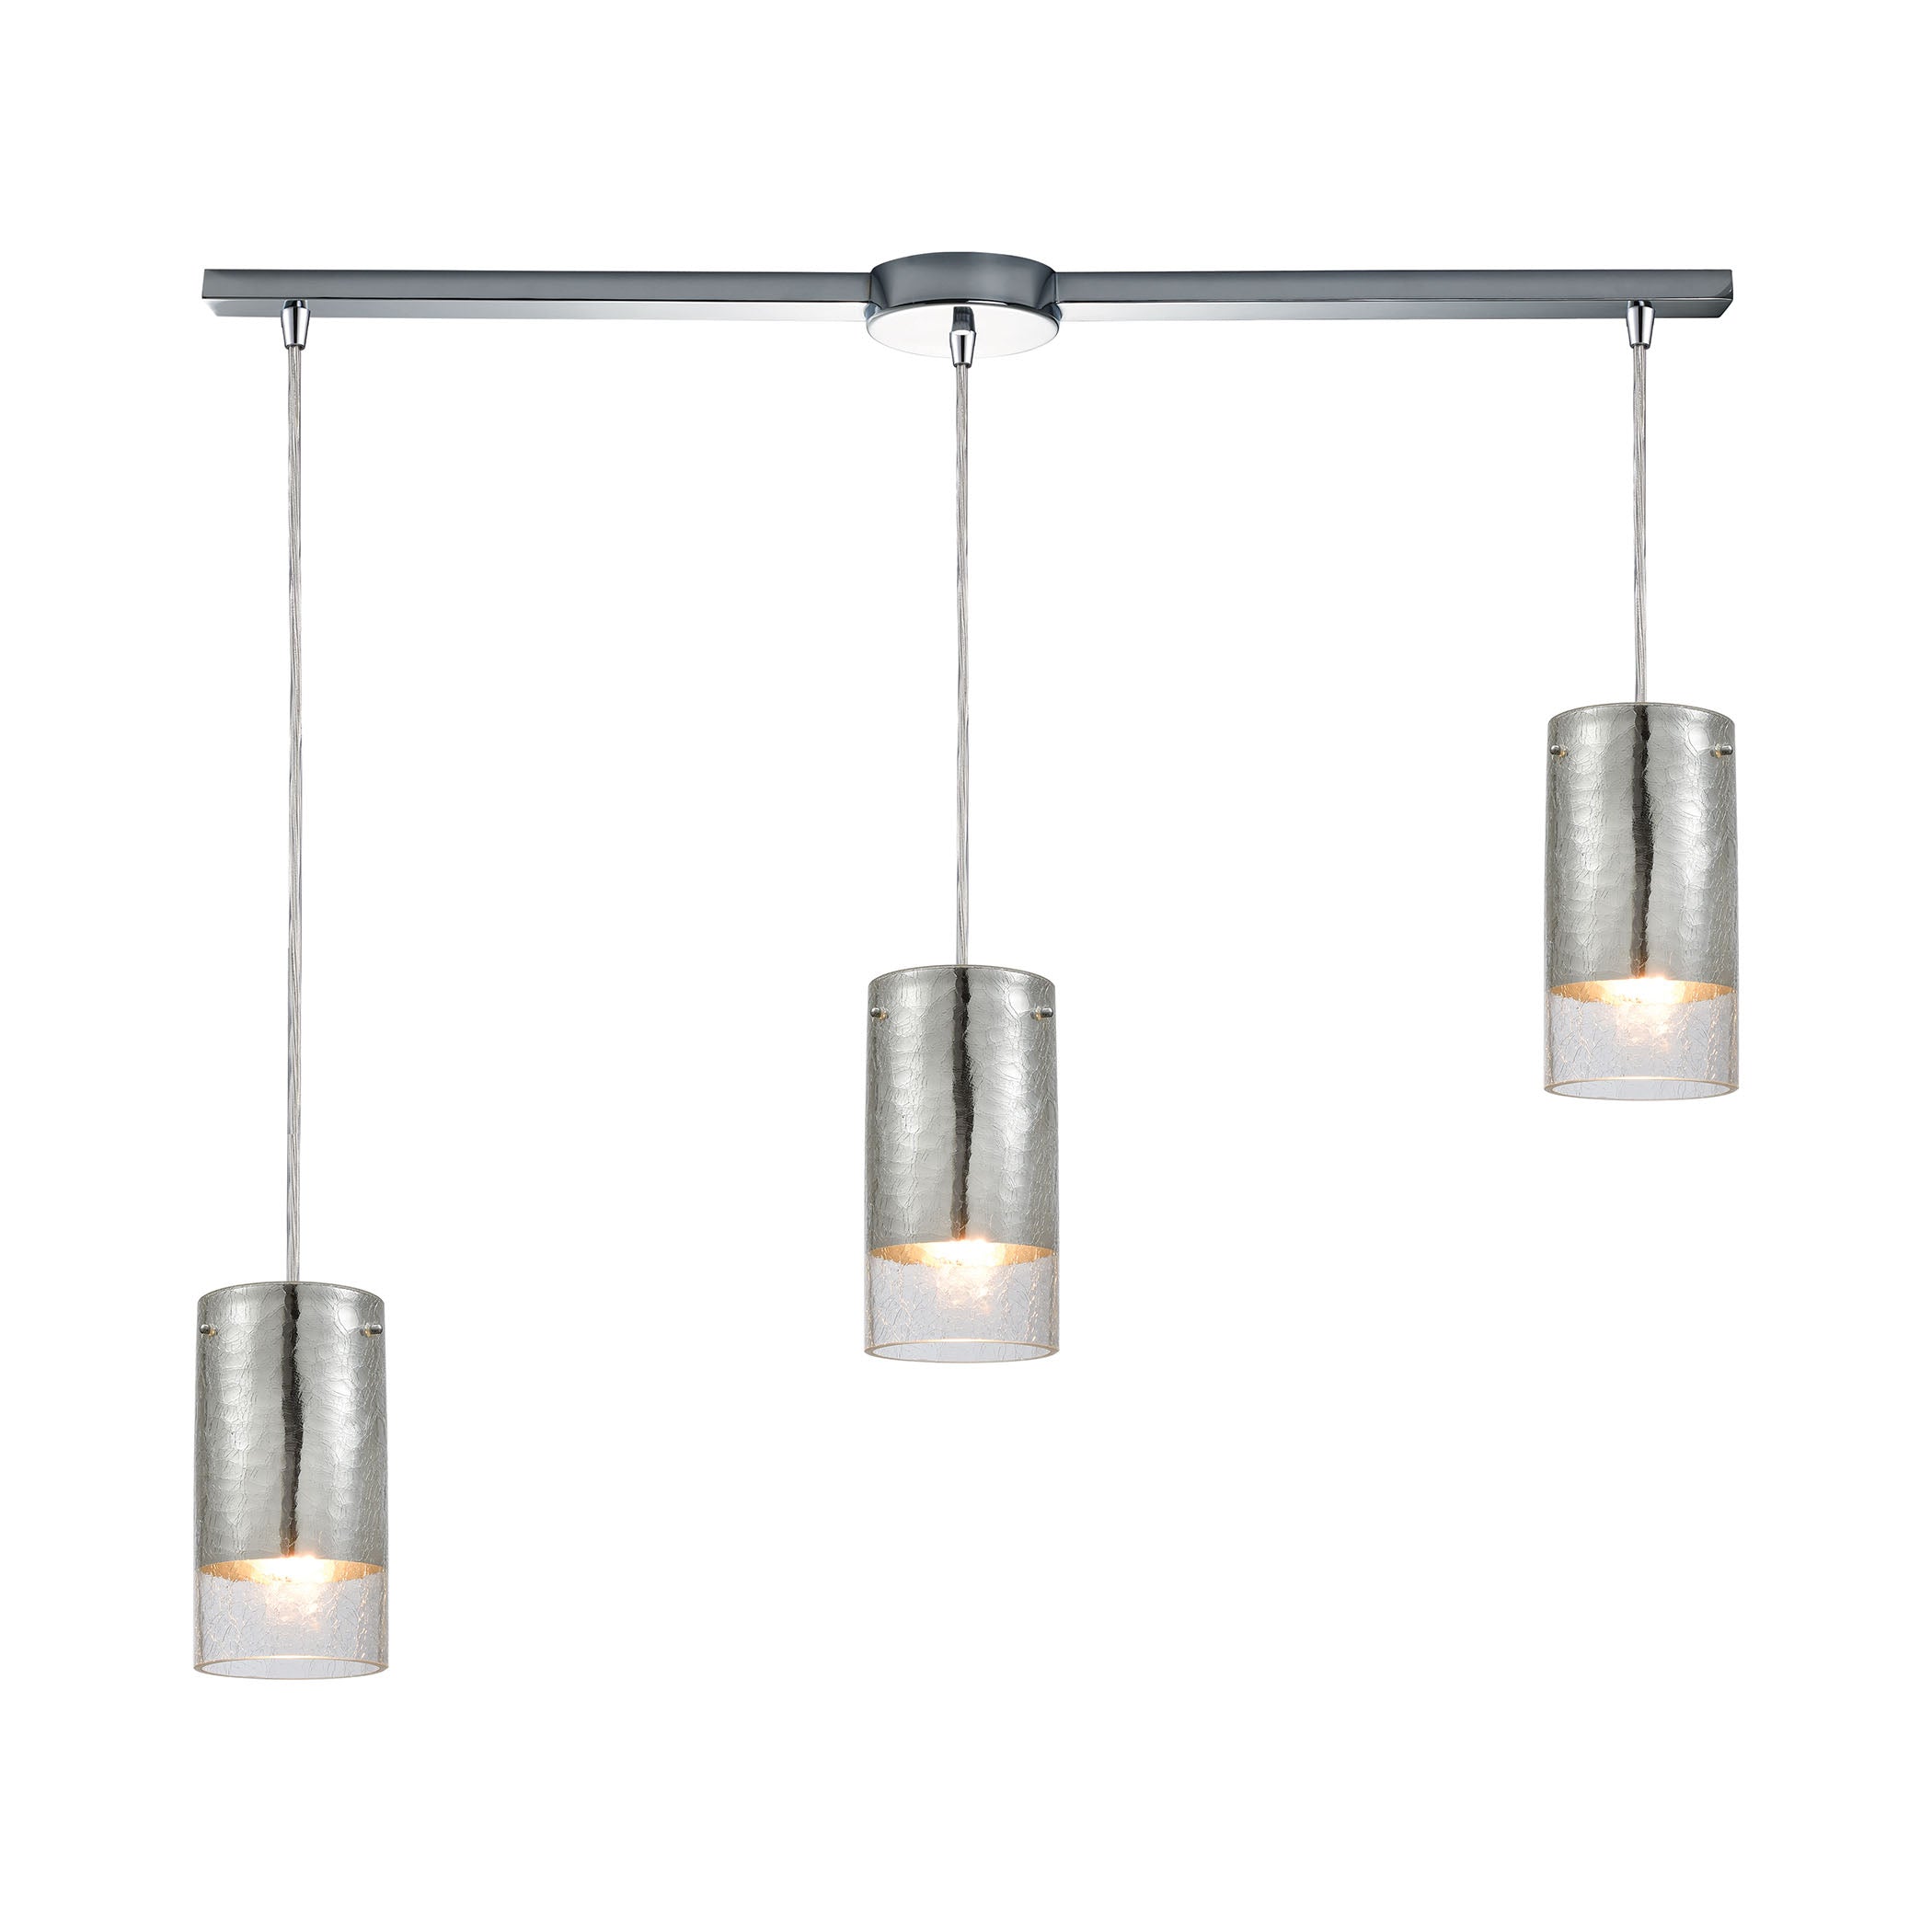 ELK Lighting 10570/3L Tallula 3-Light Linear Mini Pendant Fixture in Chrome with Chrome-plated and Clear Crackle Glass